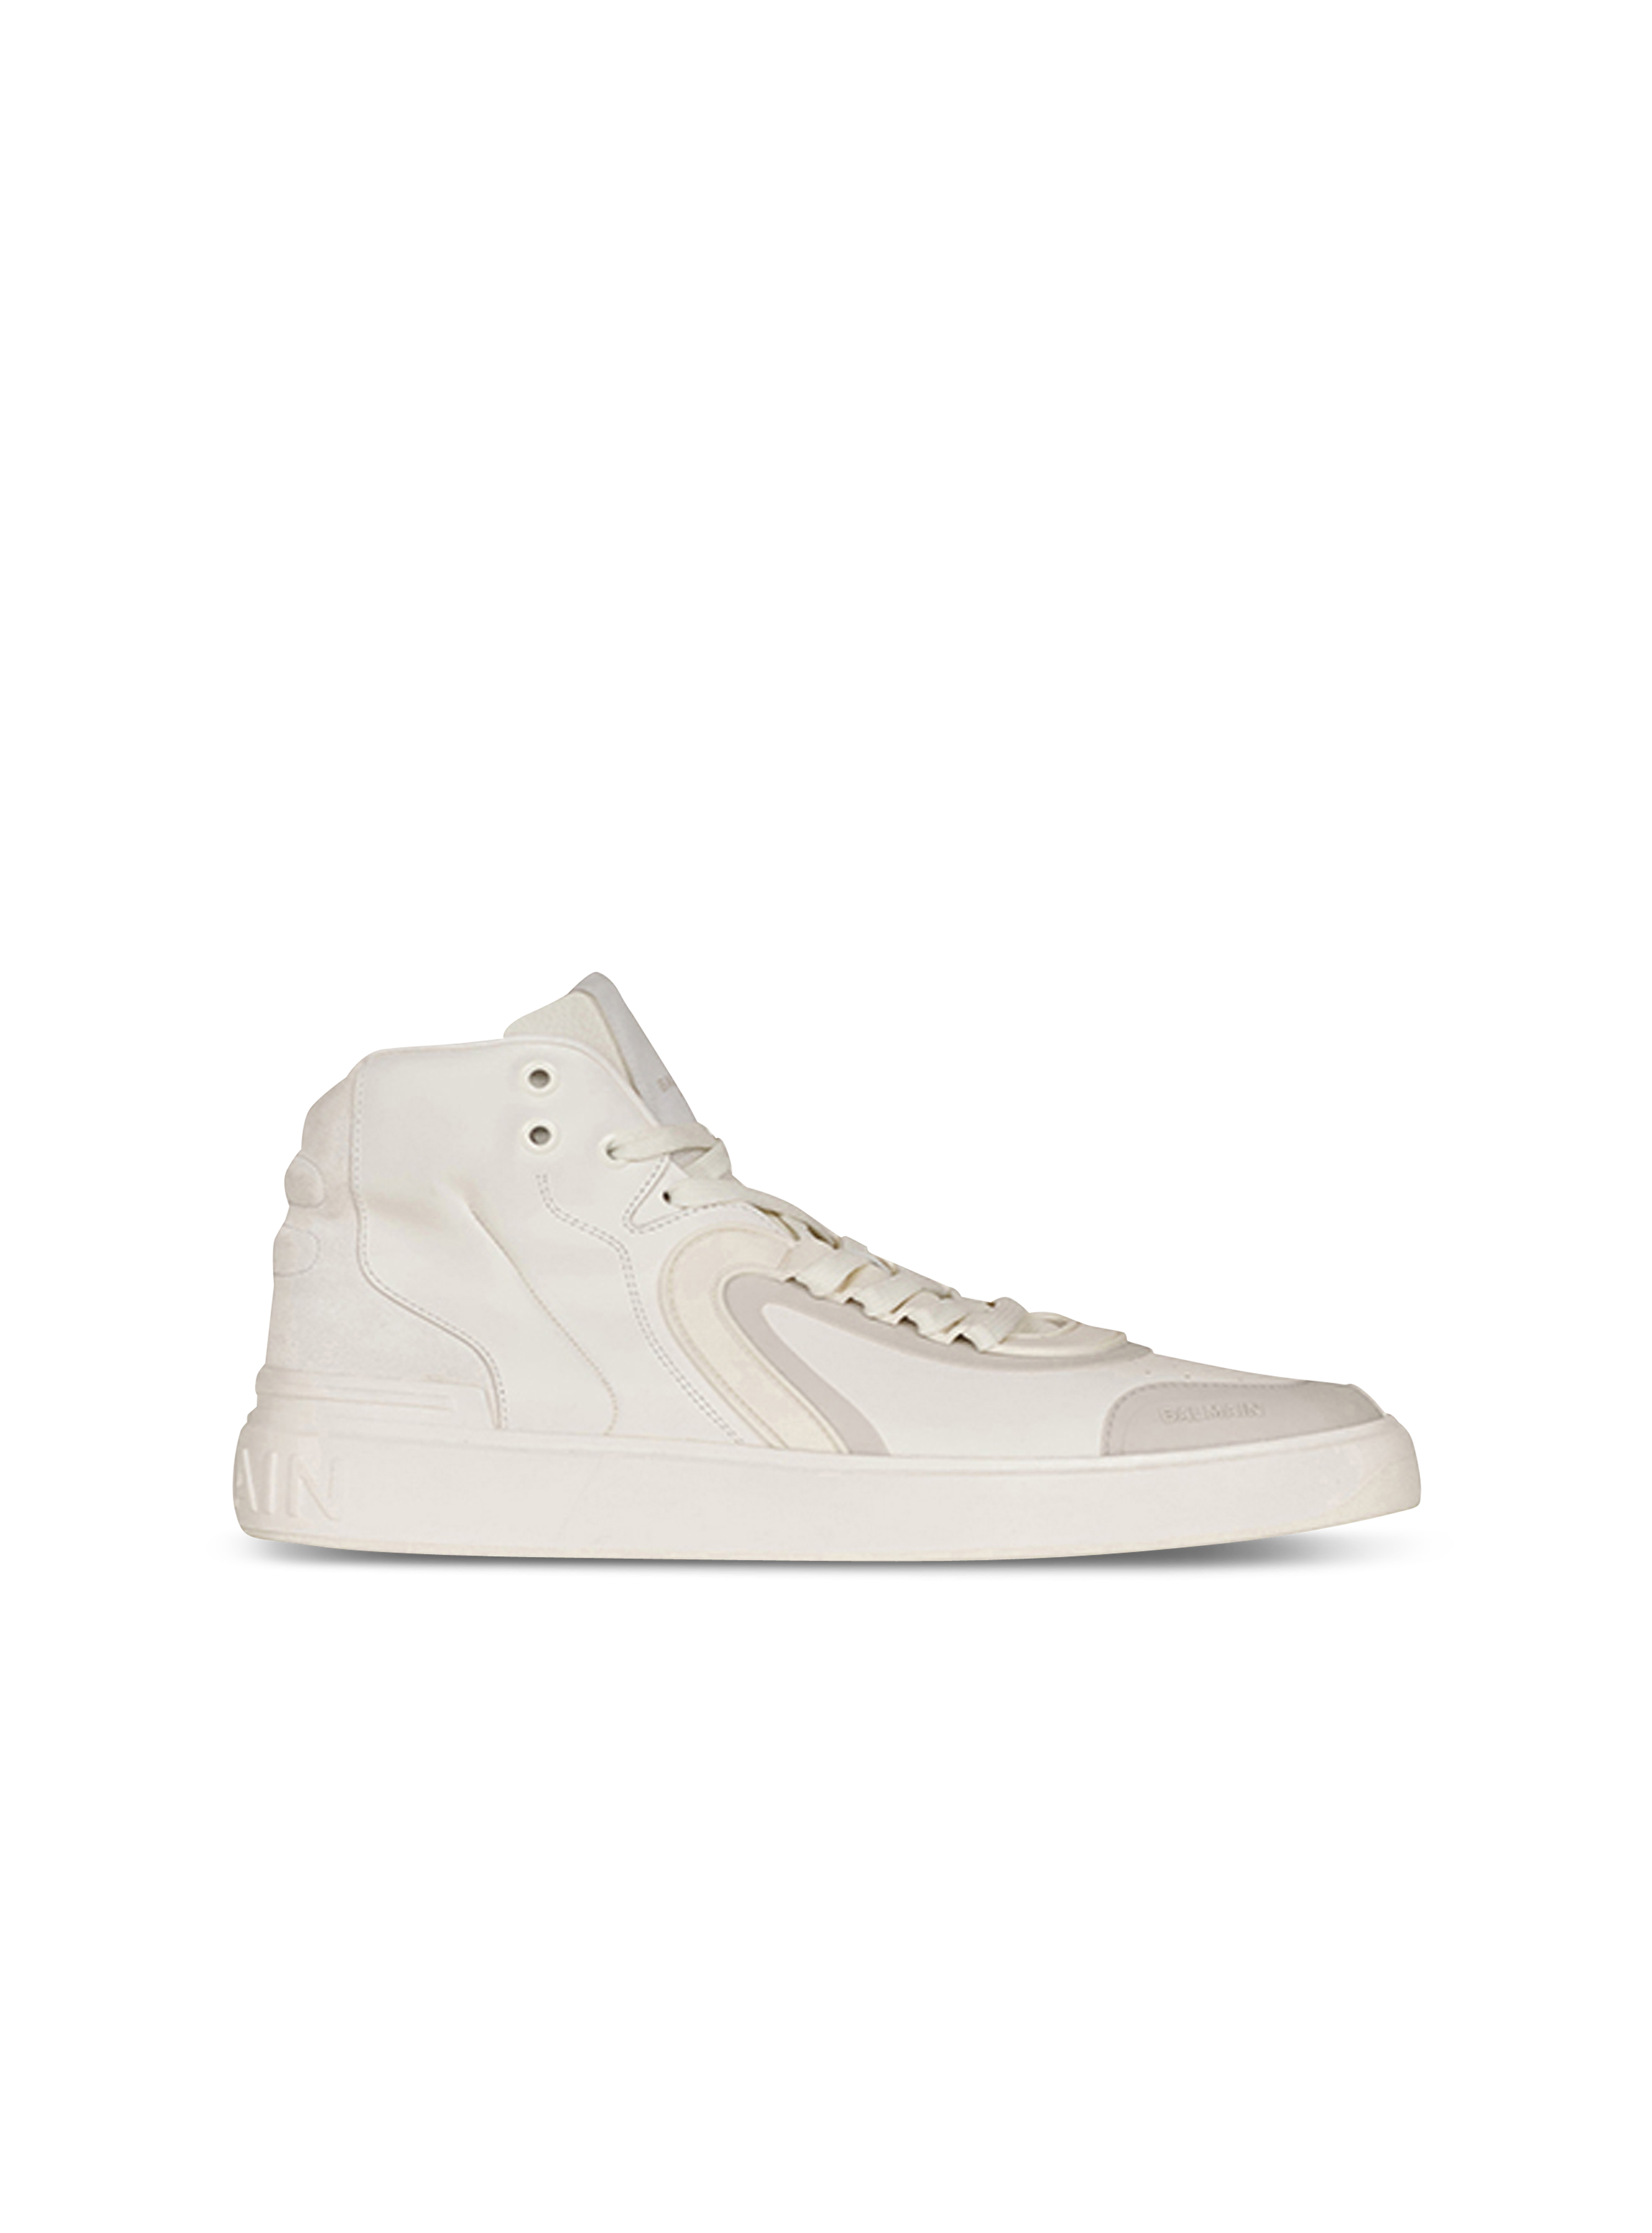 Leather and suede B-Skate high-top sneakers, white